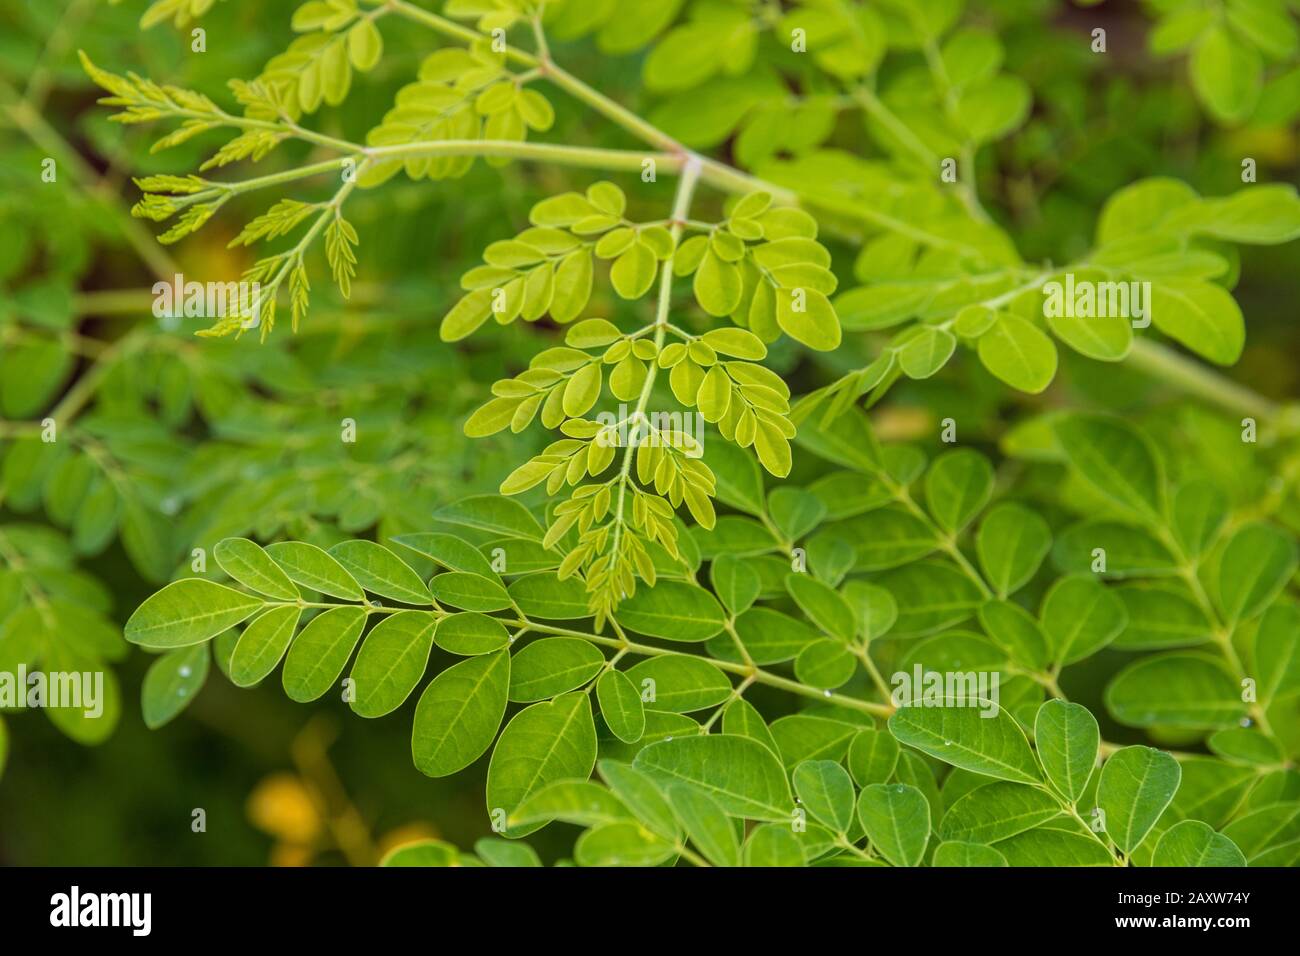 Great close-up view of moringa leaves (Moringa oleifera) taken from a garden in Malaysia, Southeast Asia. The leaves can be cooked and eaten or dried... Stock Photo